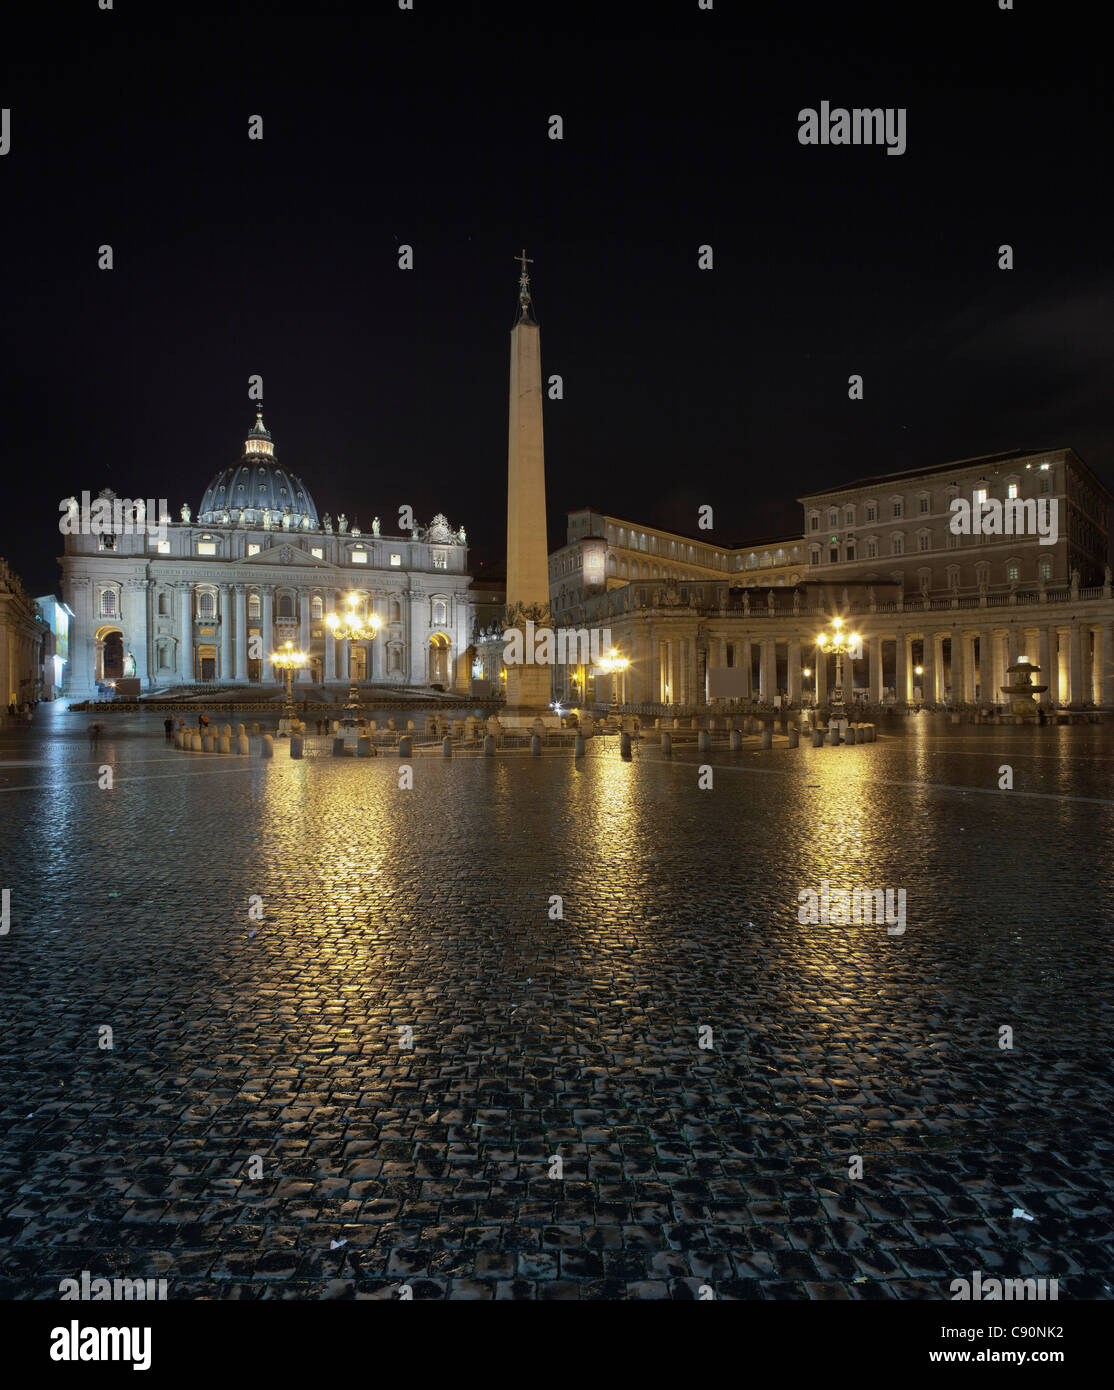 Saint Peter's Square with St. Peter's Basilica and the Apostolic Palace at night, Roma, Latium, Italy Stock Photo